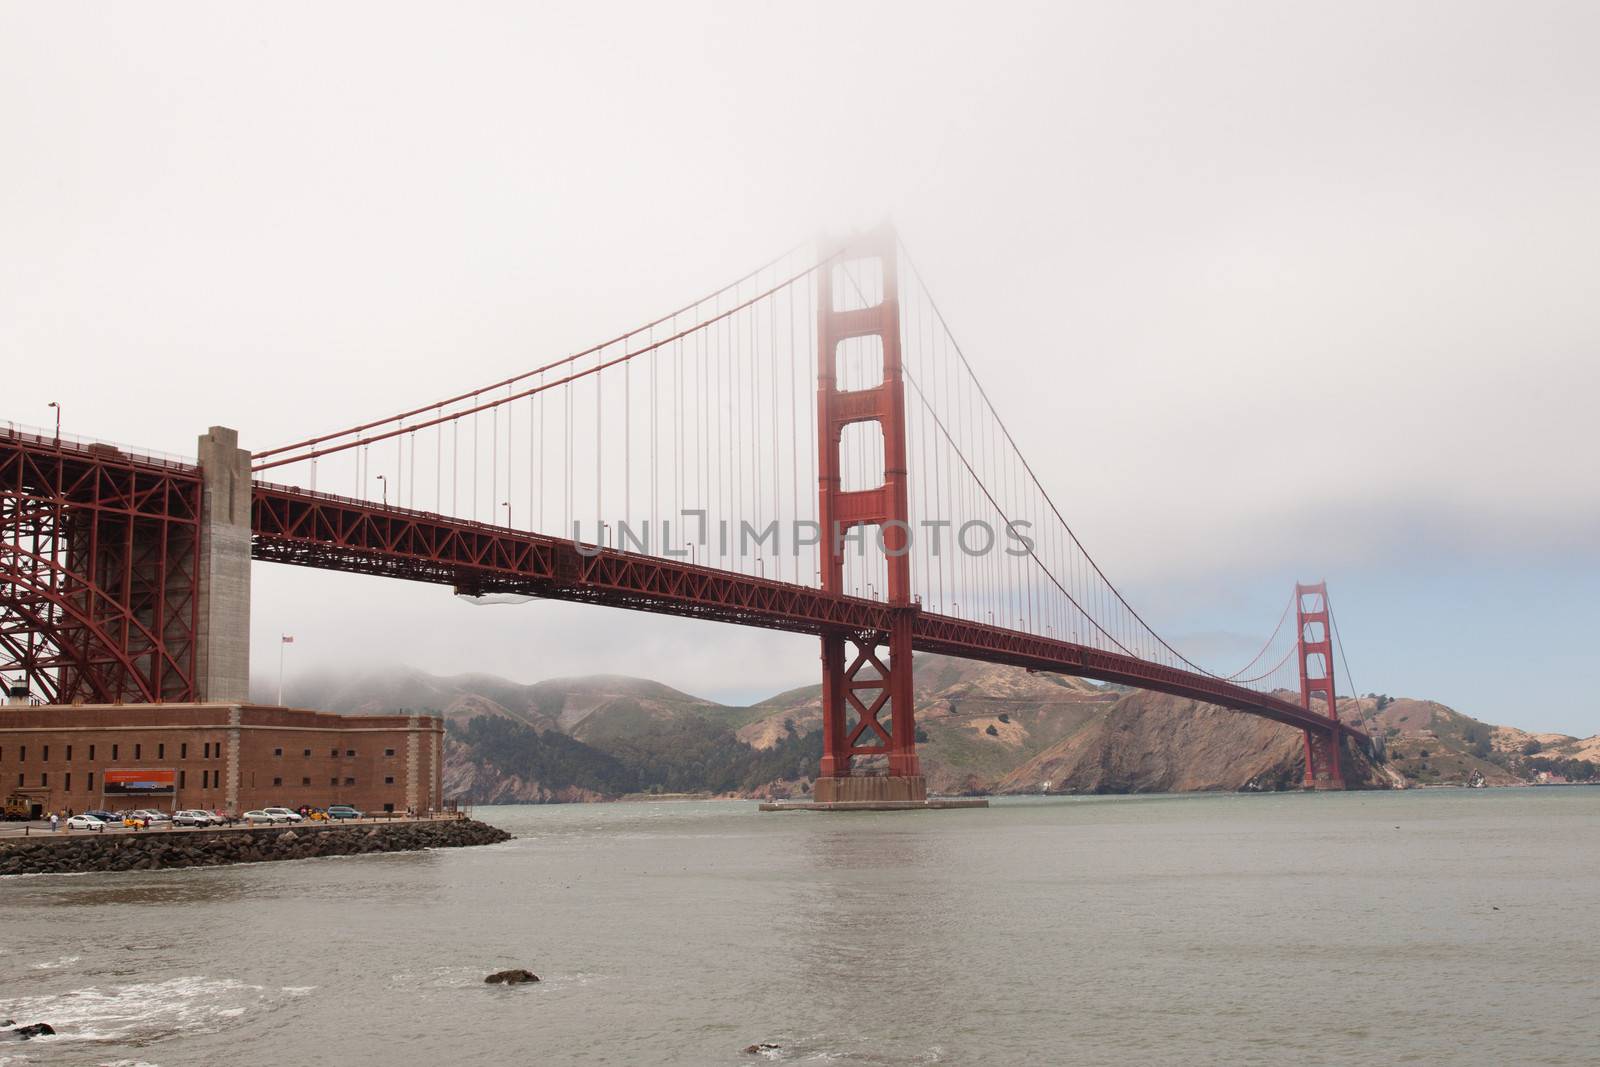 Fort Point is located at the southern side of the Golden Gate at the entrance to San Francisco Bay.